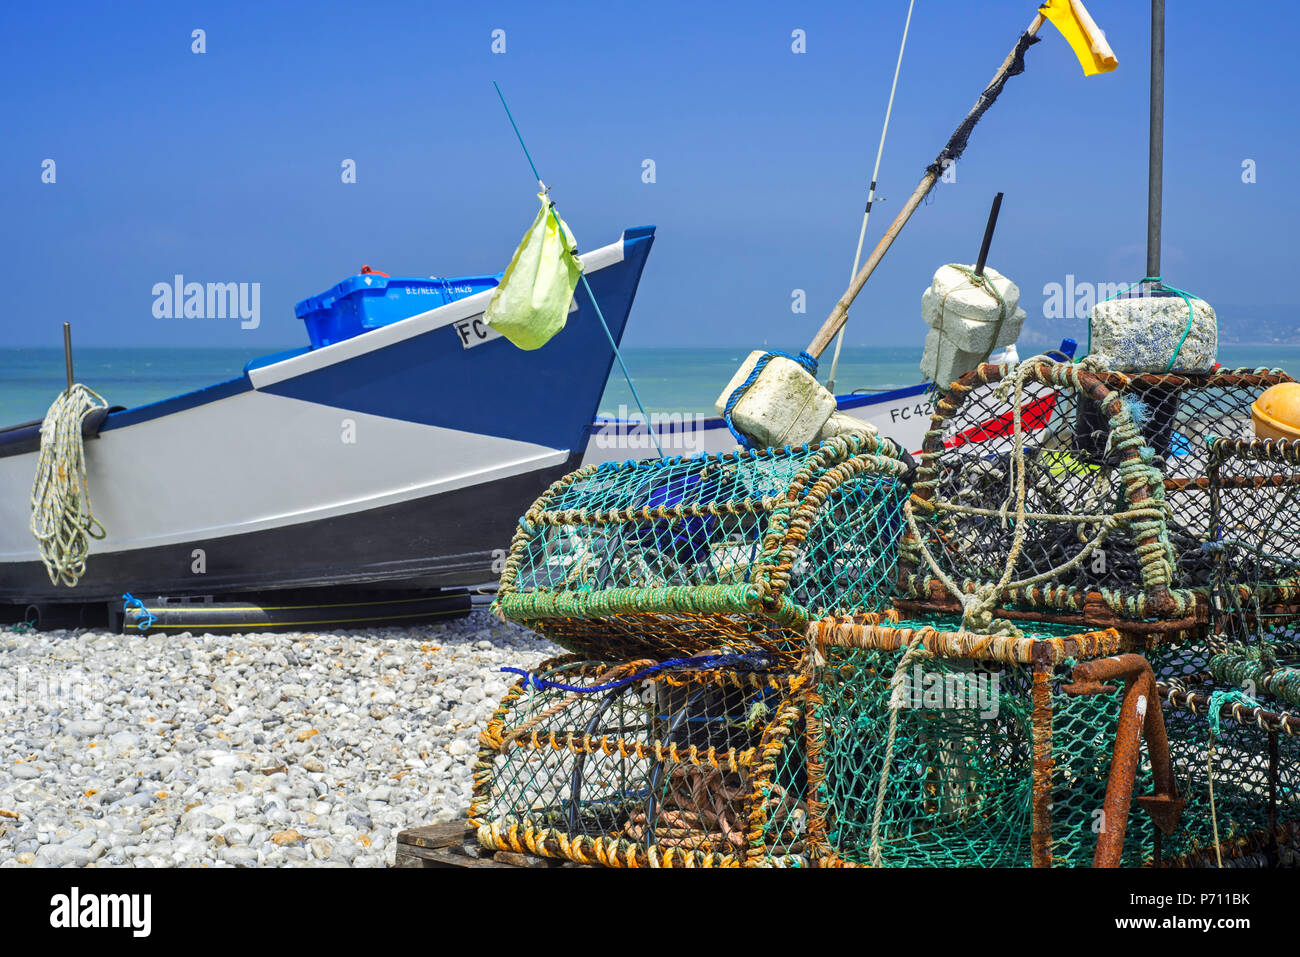 Traditional fishing boats / caïques and lobster pots on beach at seaside resort Yport, Normandy, Seine-Maritime, Côte d'Albâtre, France Stock Photo